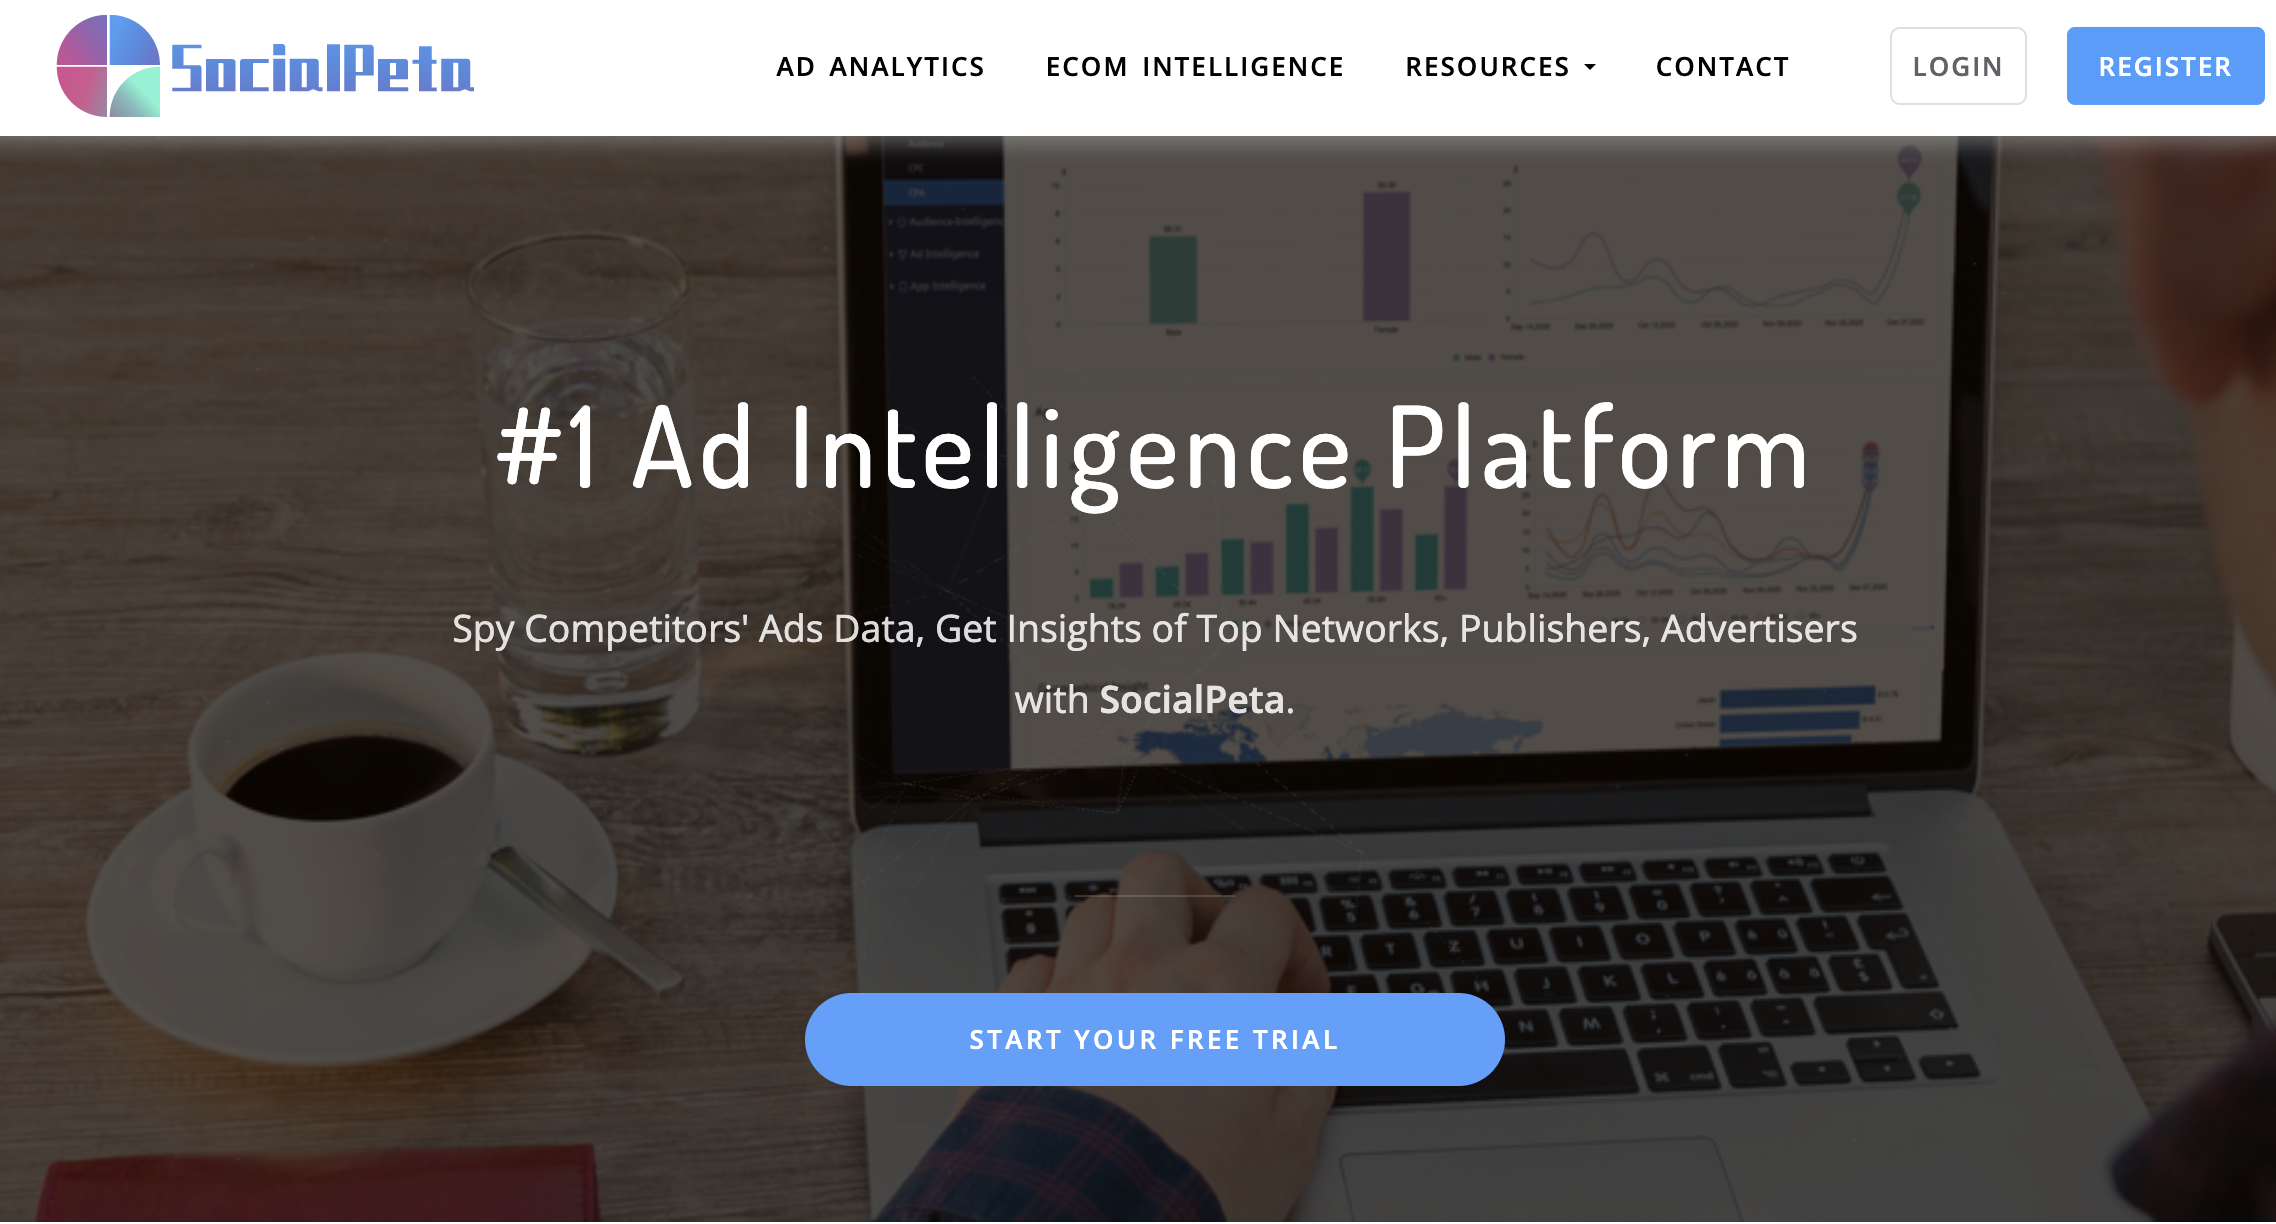 SocialPeta is a professional-level competitor advertising analysis tool. 